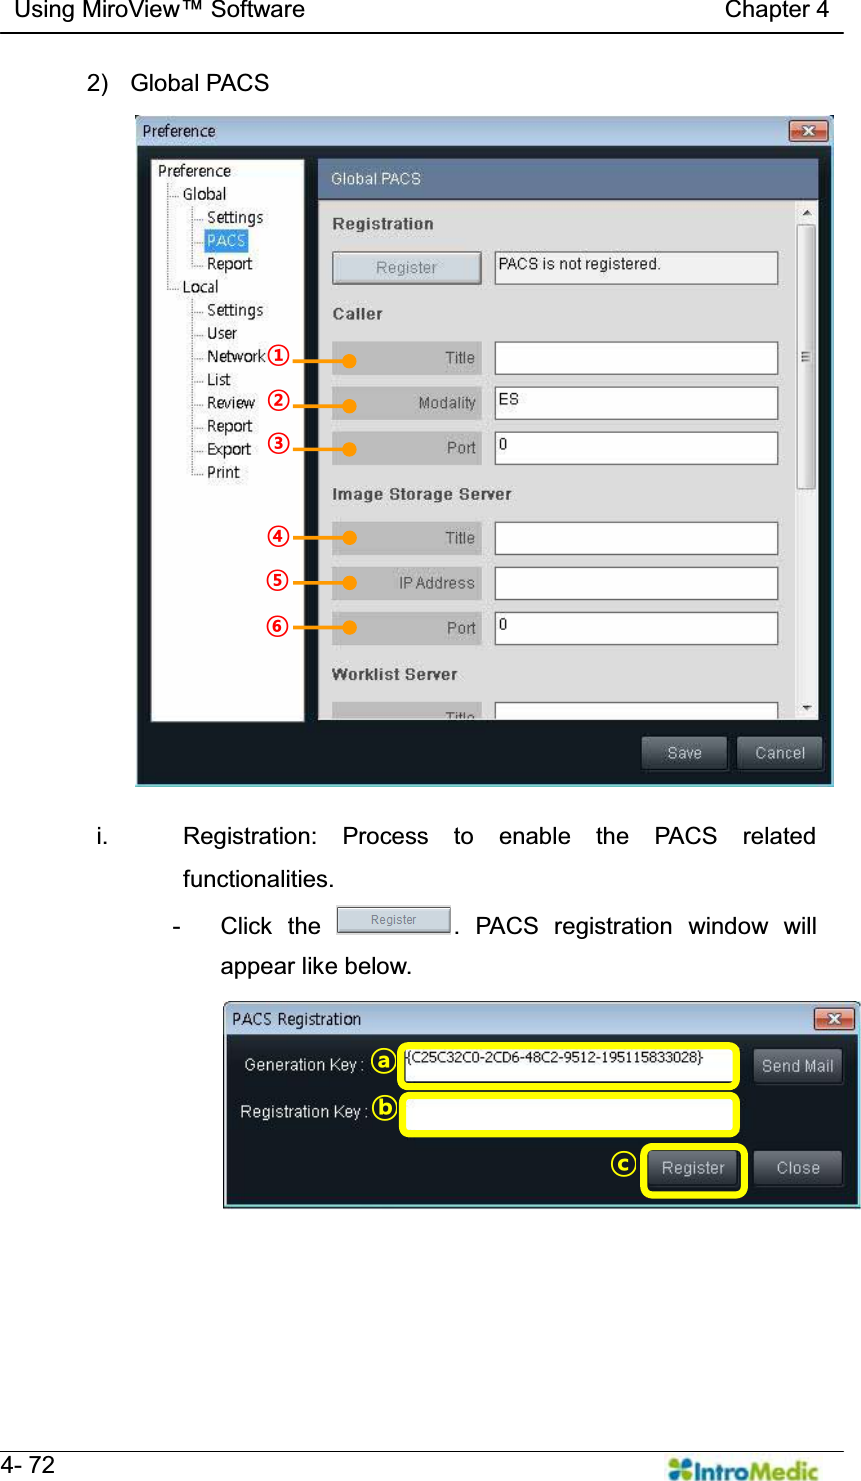   Using MiroView Software                                   Chapter 4   4- 72 2) Global PACS  i.  Registration: Process to enable the PACS related functionalities. - Click the  . PACS registration window will appear like below.  ¢ ¤ £ ¥ ¦ § § ¦ ¥ ¢ £ ¤ ÚÛÜ